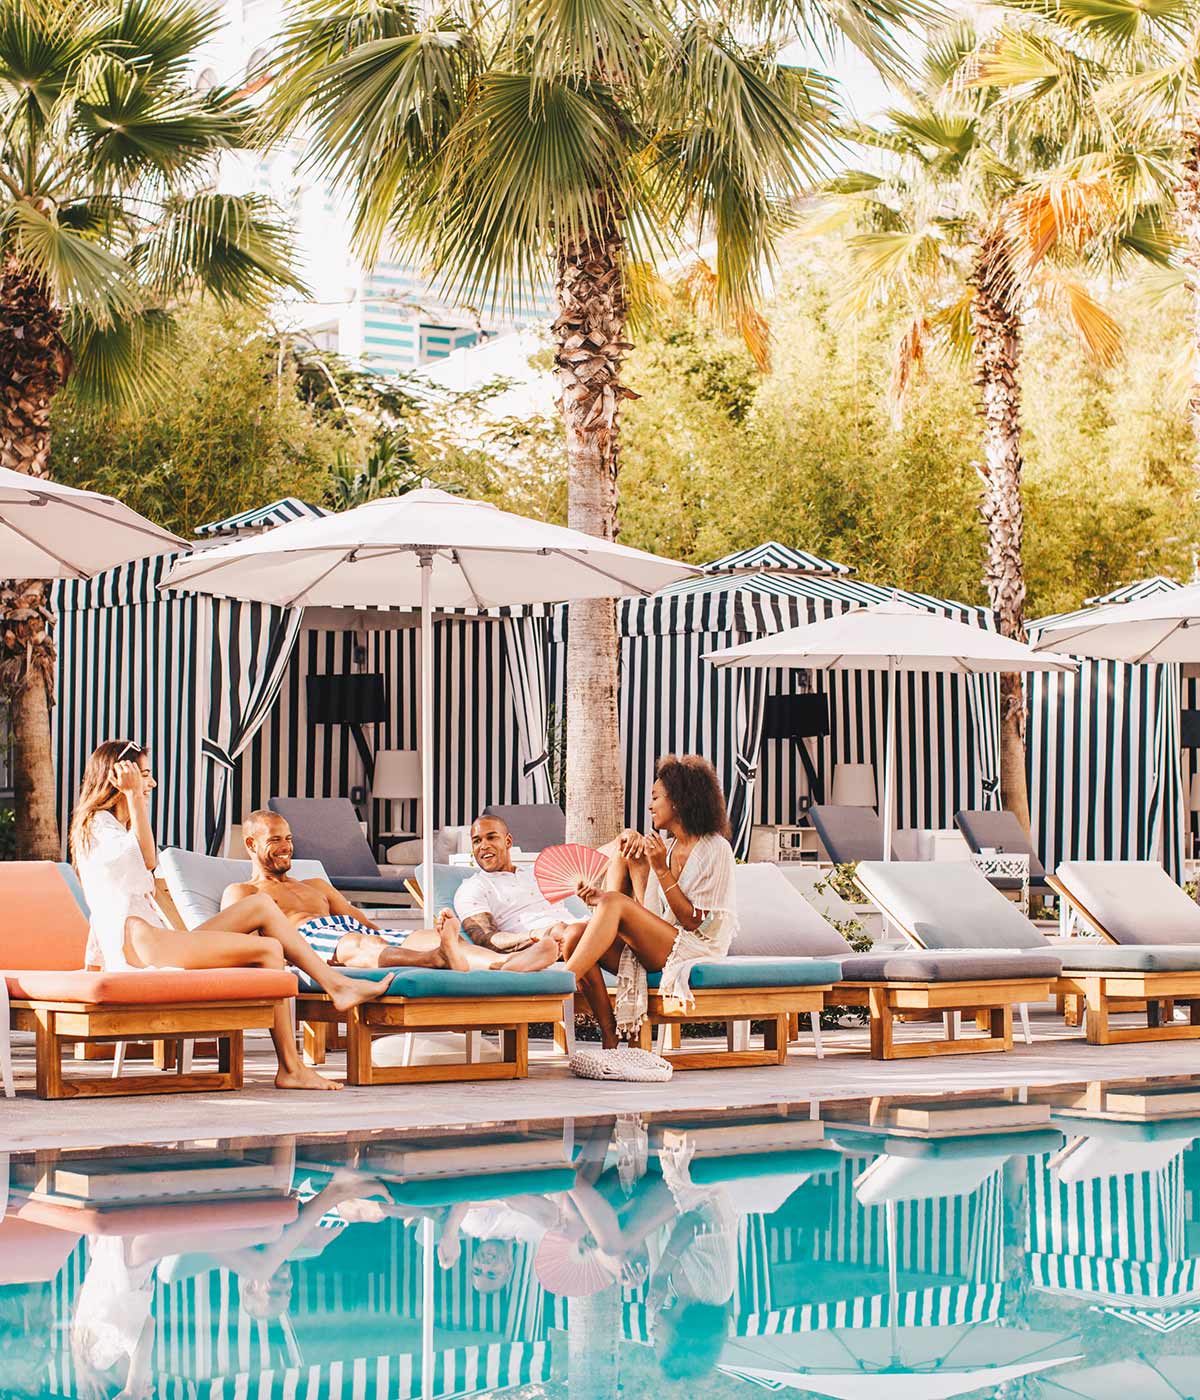 group of friends sitting and talking on loungers by the pool, in front of a row of striped cabanas